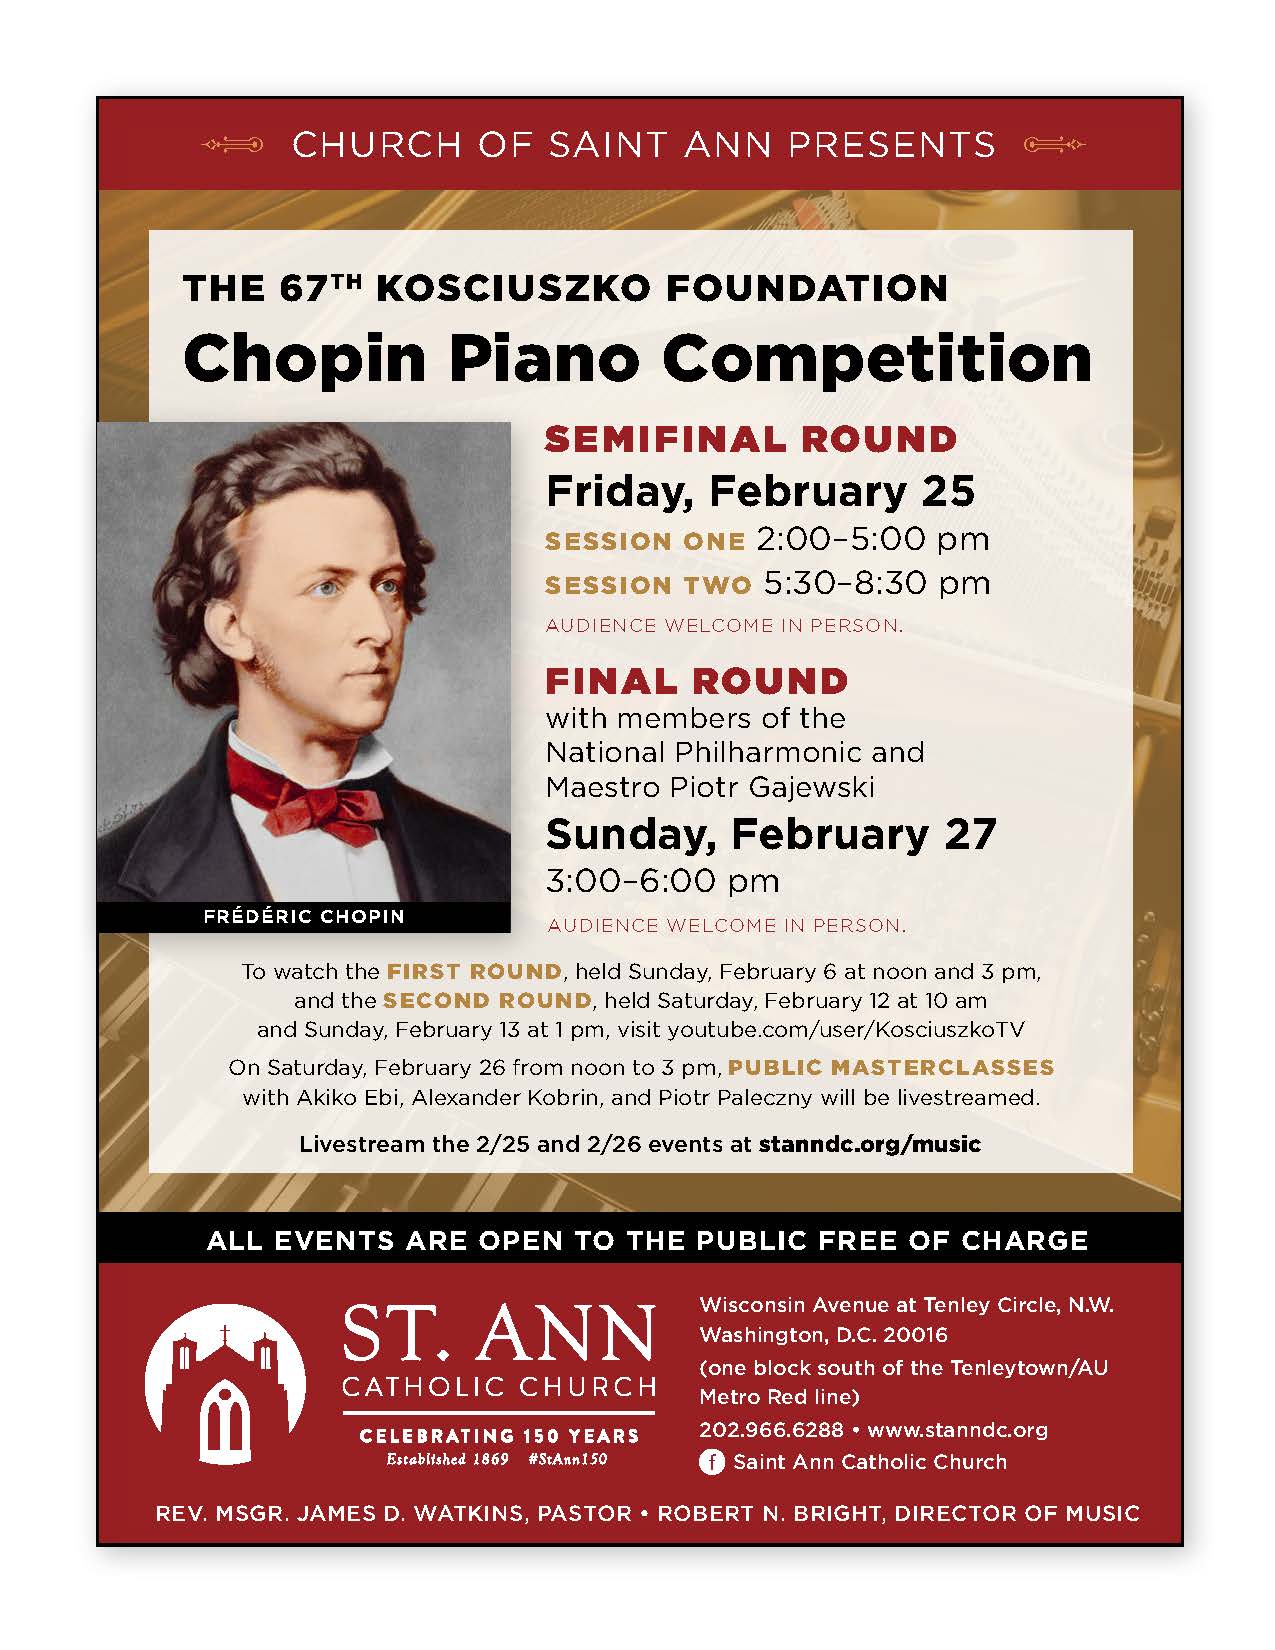 Chopin Piano Competition